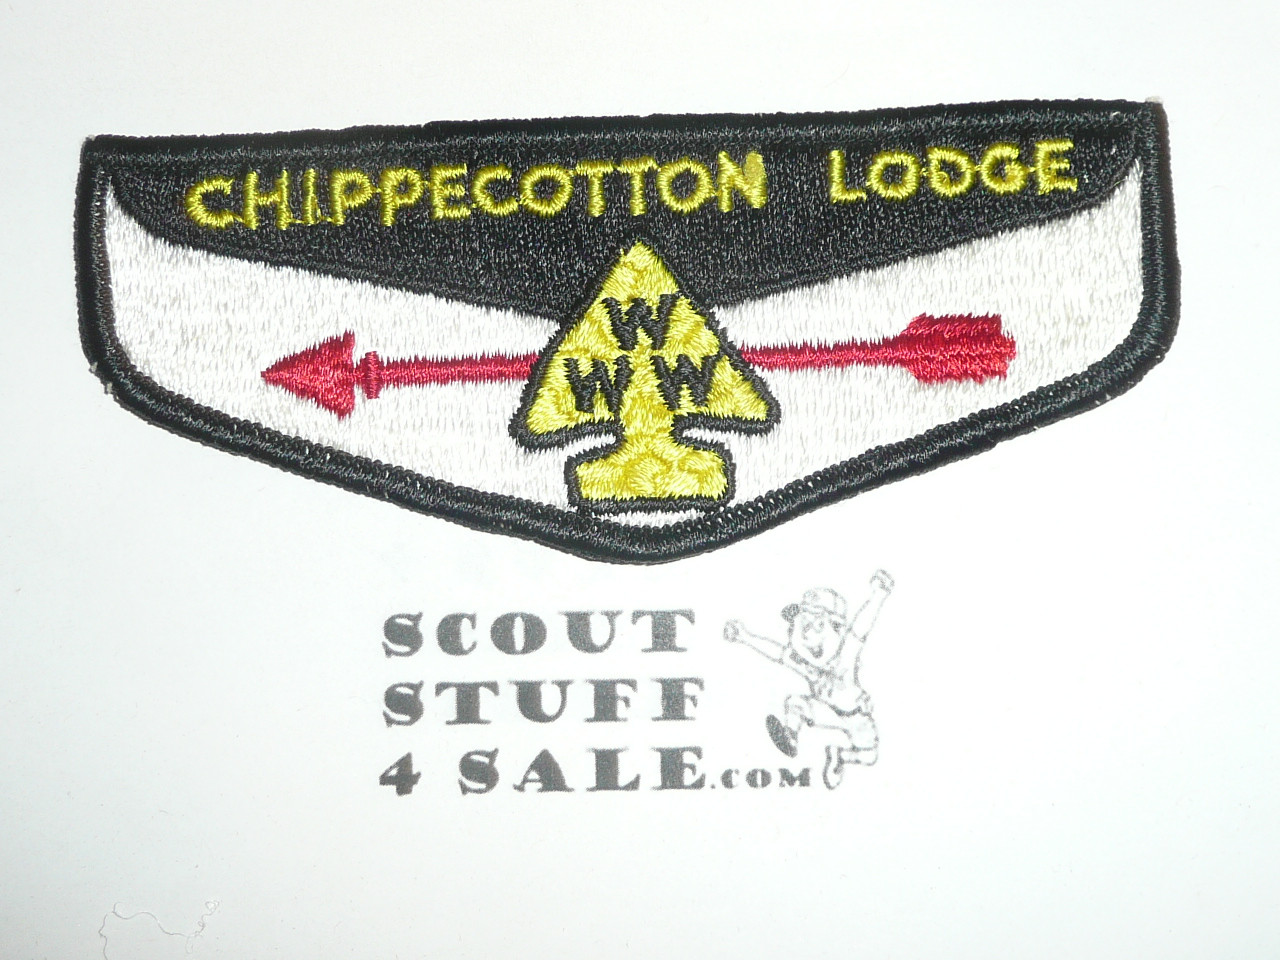 Order of the Arrow Lodge #524 Chippecotton s4 Flap Patch